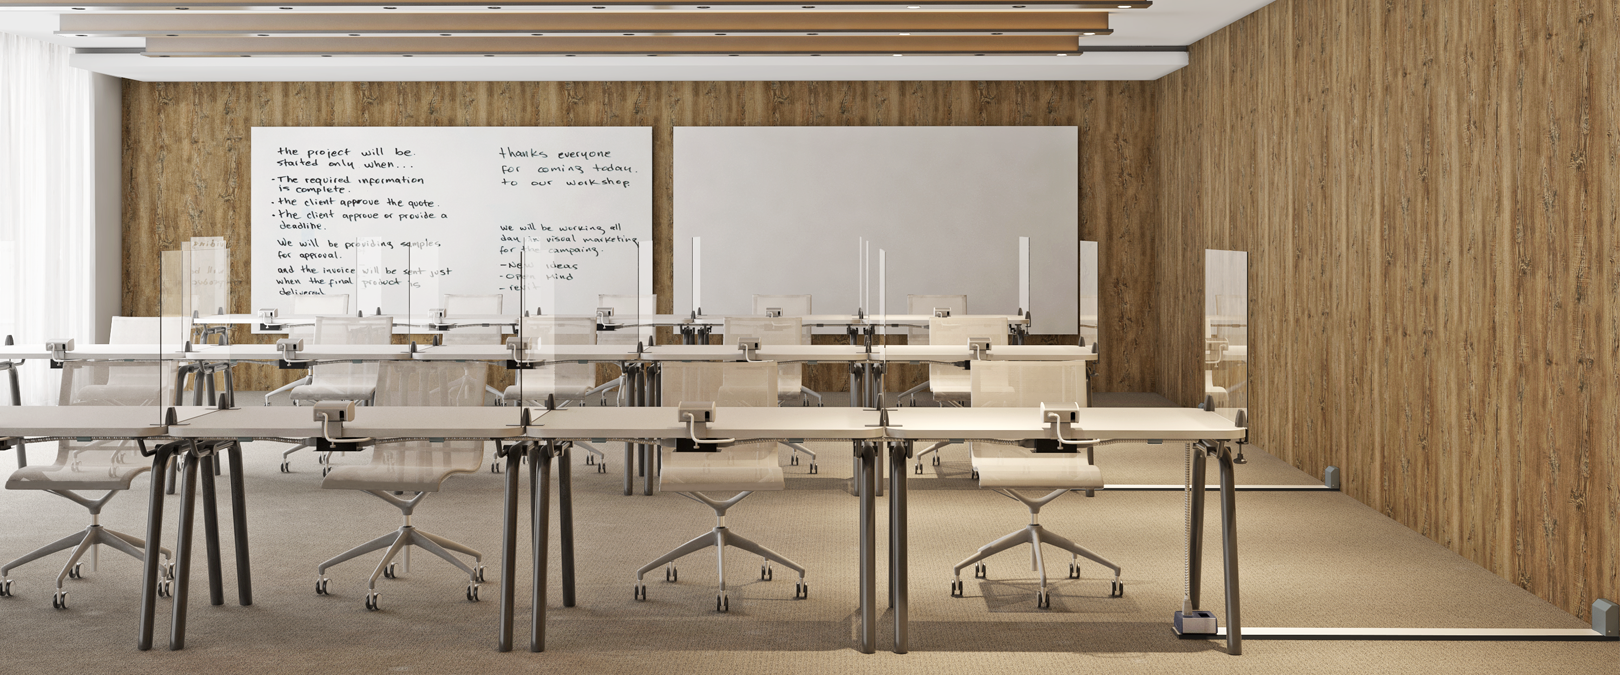 MLS-Classroom-1620x675 Bring Learning to Life by Incorporating Microsoft Surface in the Classroom - FSR, Inc. - AV Connectivity Solutions